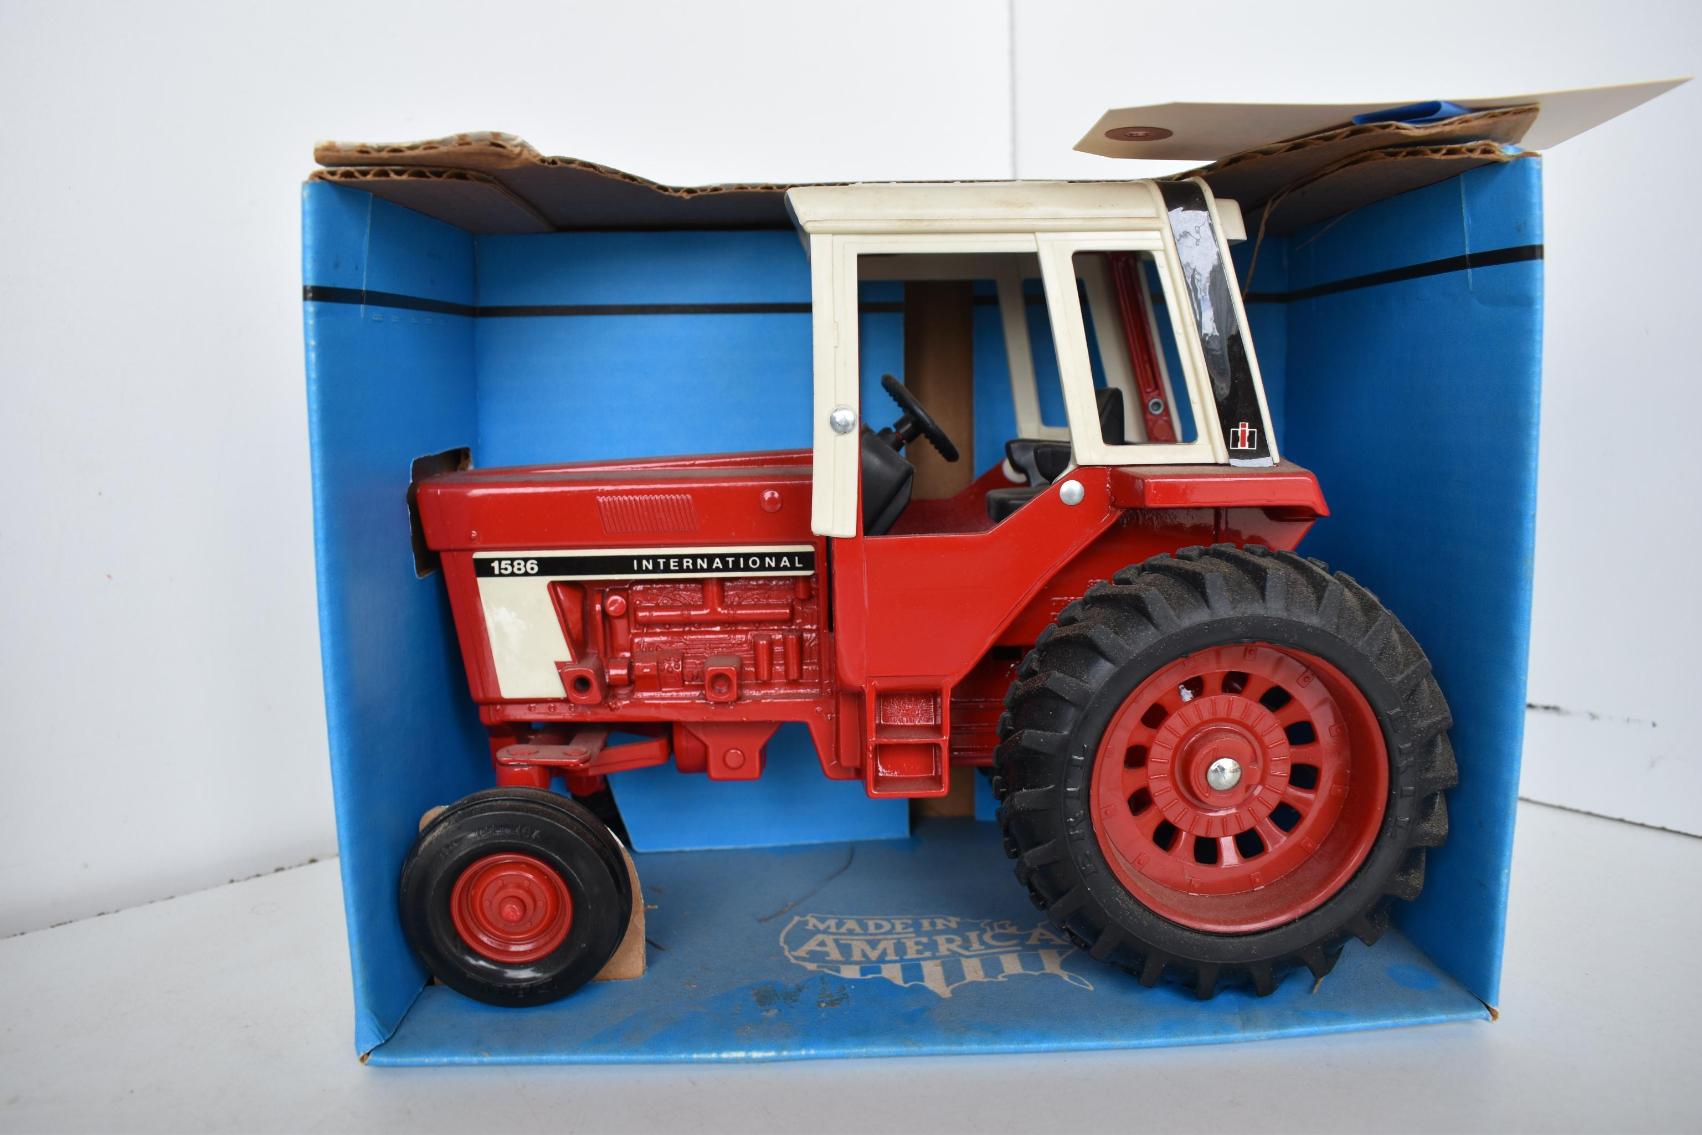 Toy Tractors: Farmall, New Holland, Oliver,  Allis Chalmers, Case, IH